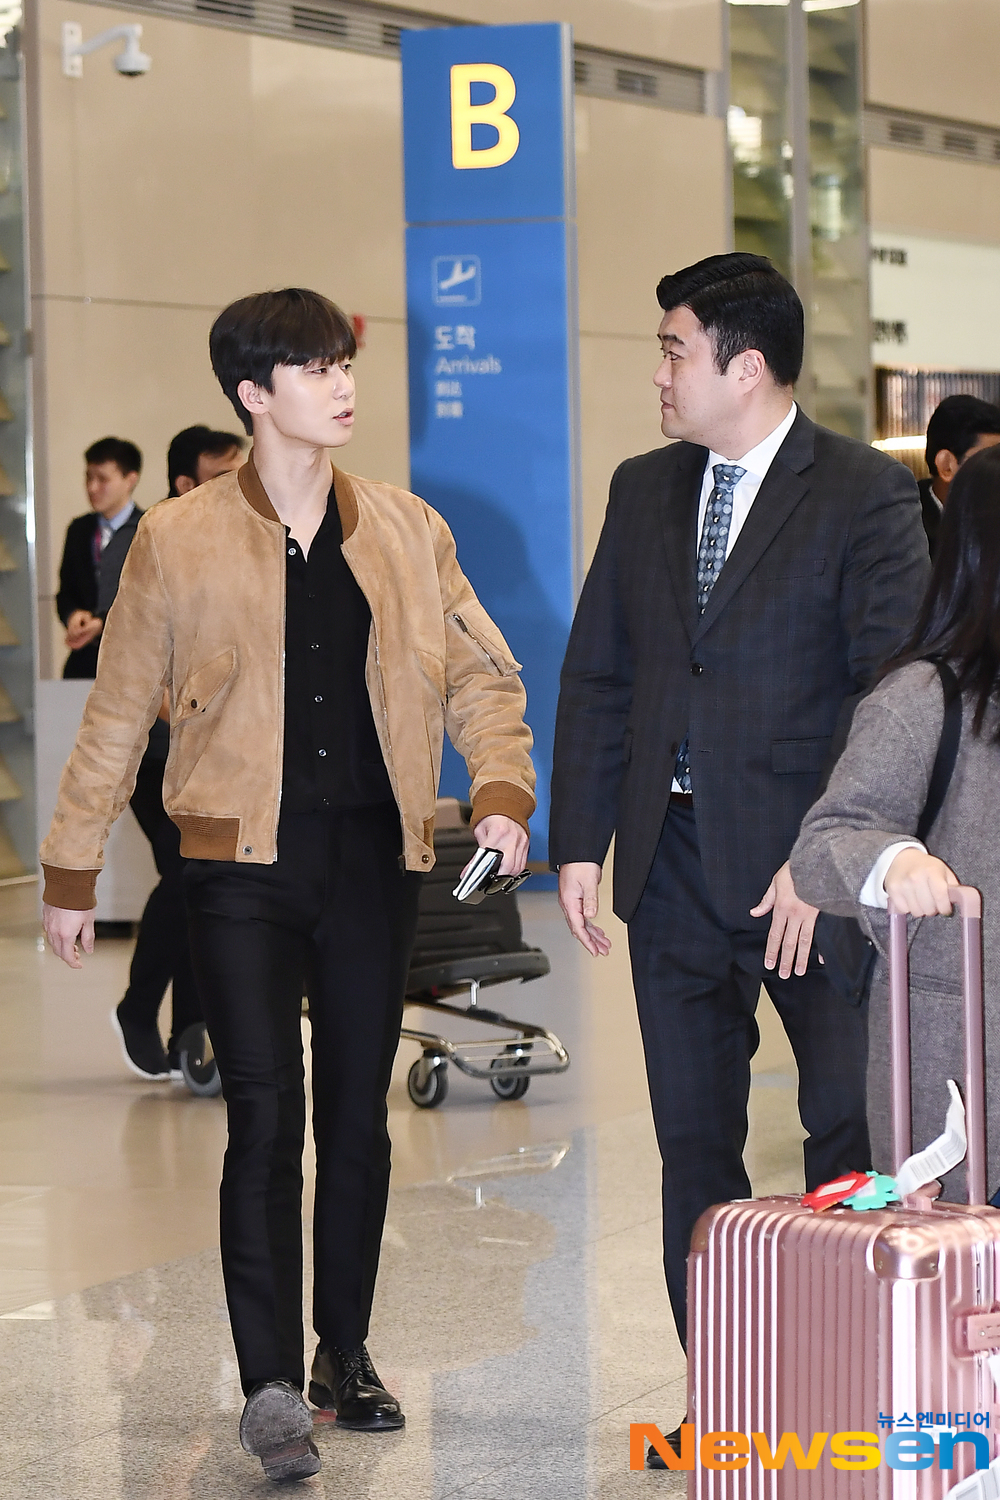 <p>Actor Park Seo-joon(Park Seo-joon)3 18 PM Incheon Jung-operation in Incheon International Airport via the Hong Kong Open at the 13th annual Asian Film Awards (Asian Film Awards , 2019 : AFA) Academy Awards schedule and entry.</p>